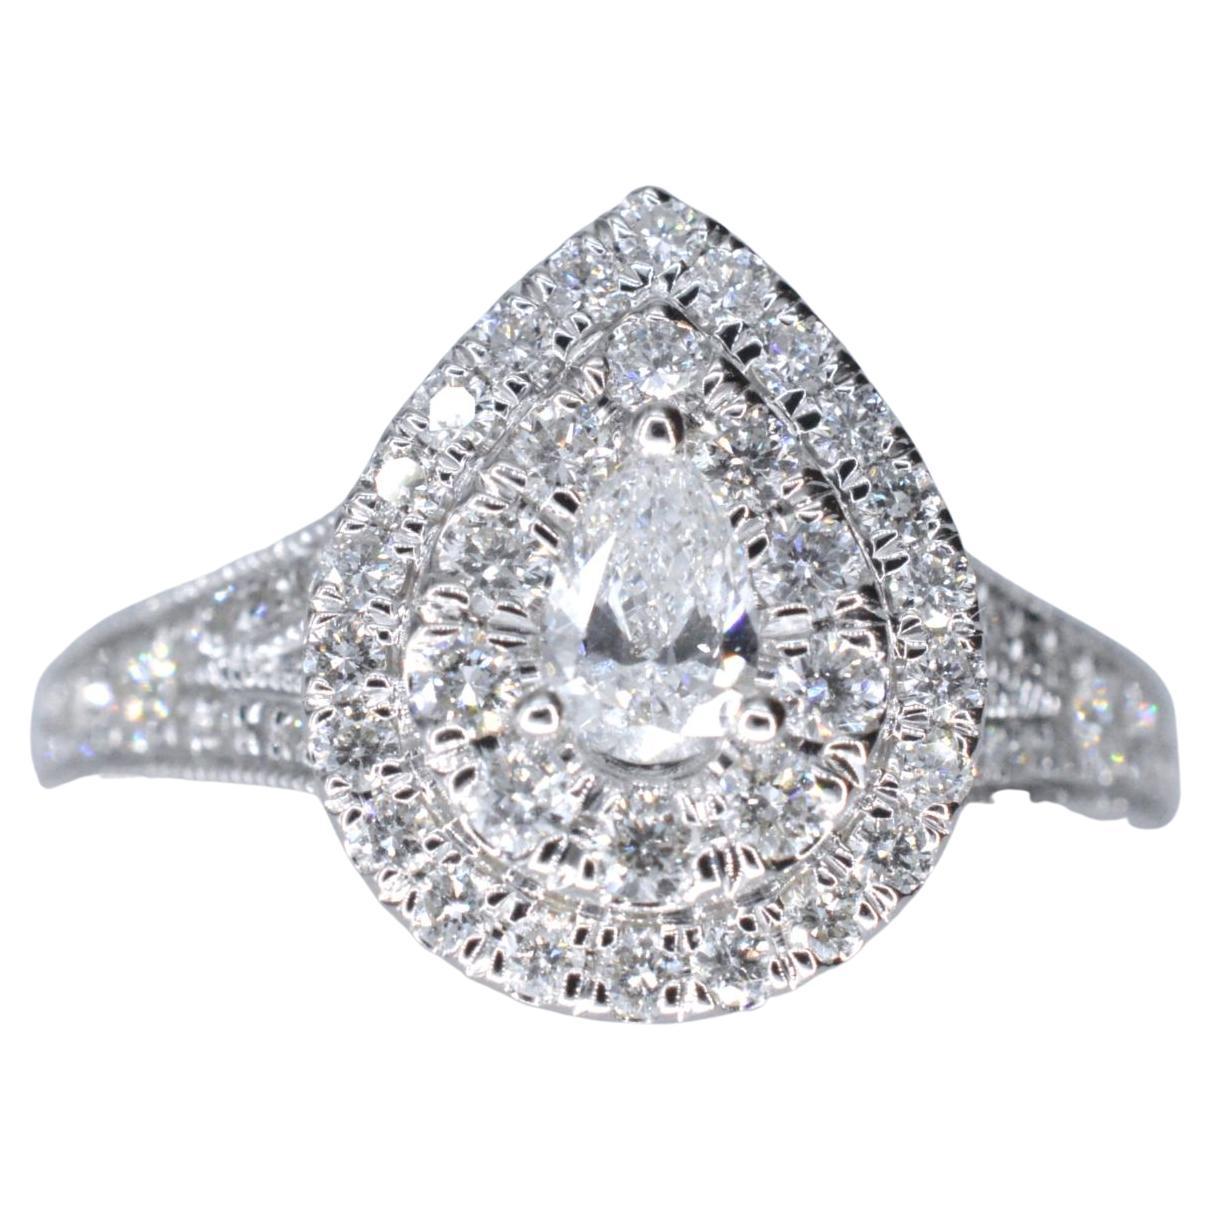 This beautiful white gold drop-shaped entourage ring is a stunning piece of jewelry that exudes elegance and sophistication. The ring features a pear-shaped center diamond that is held securely in place, showcasing its unique and exquisite shape.